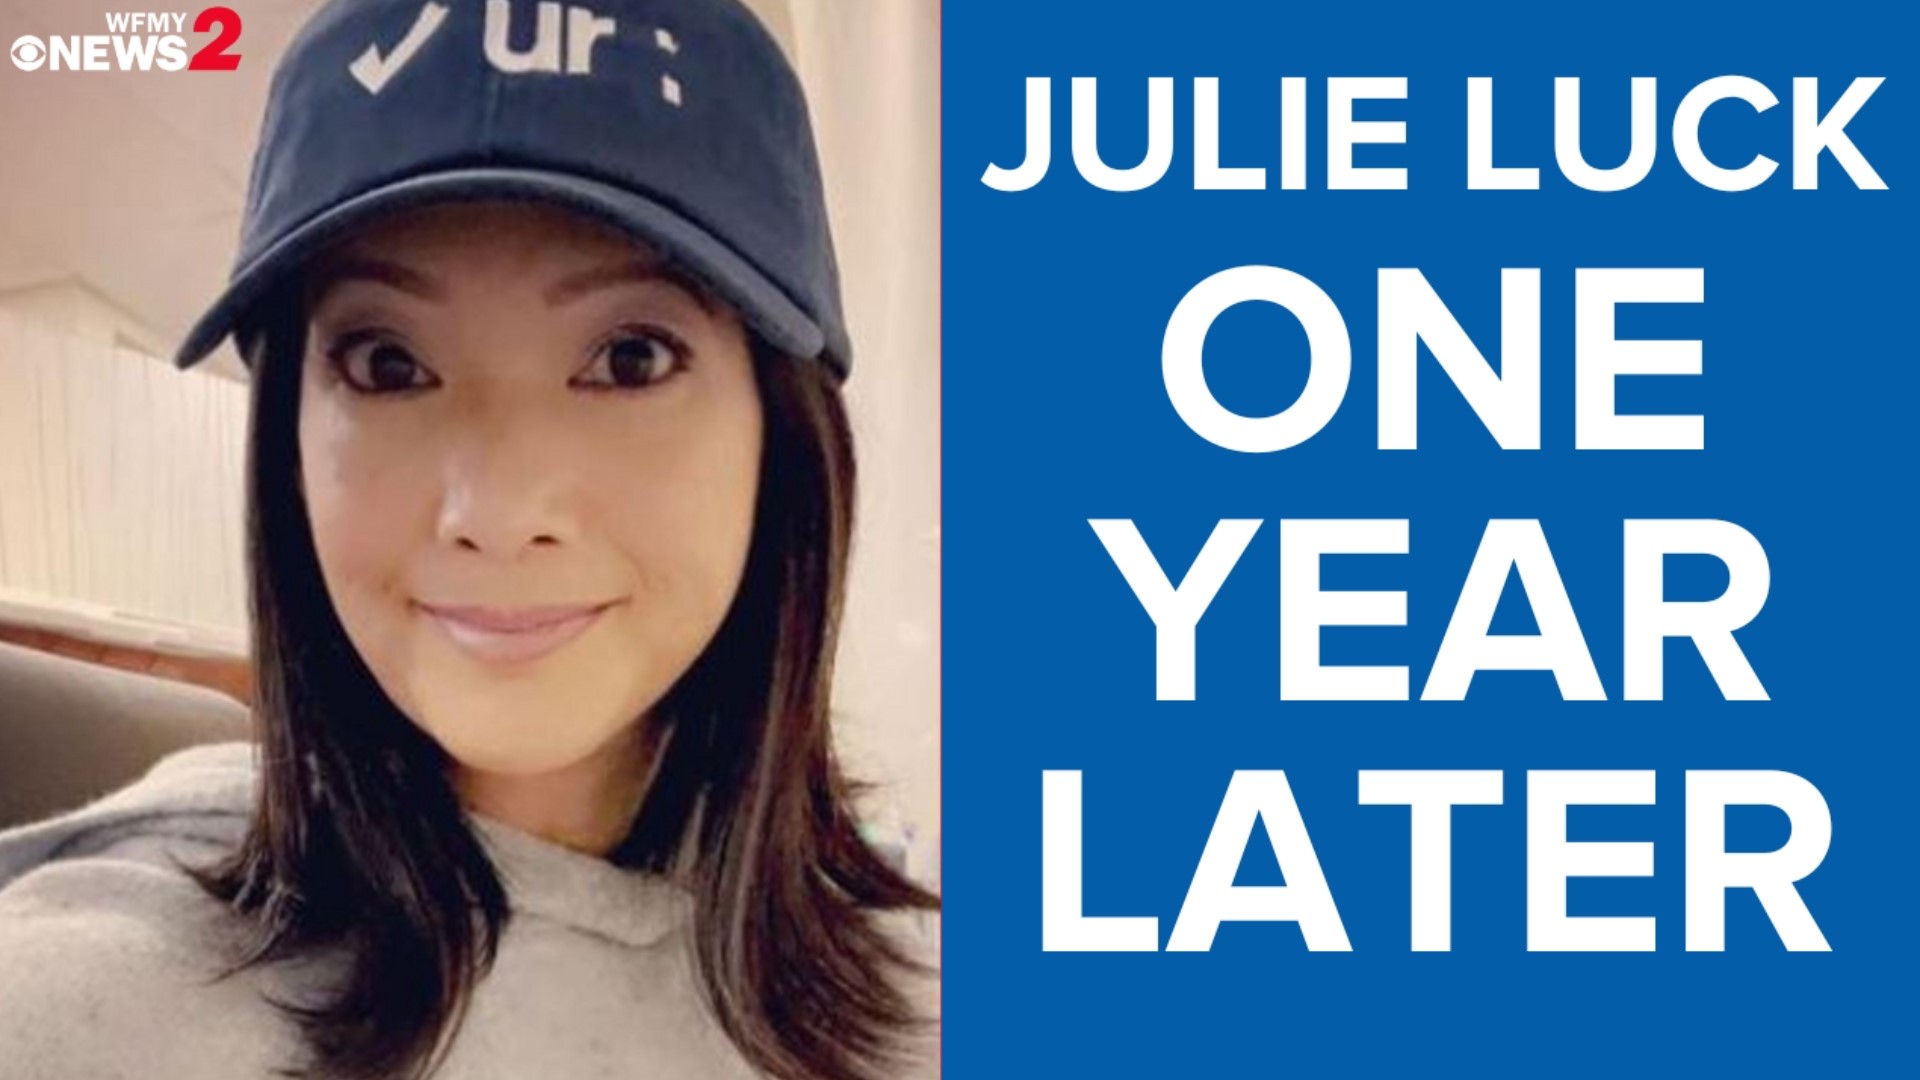 After four rounds of chemotherapy and infusions, Julie Luck remains cancer-free.